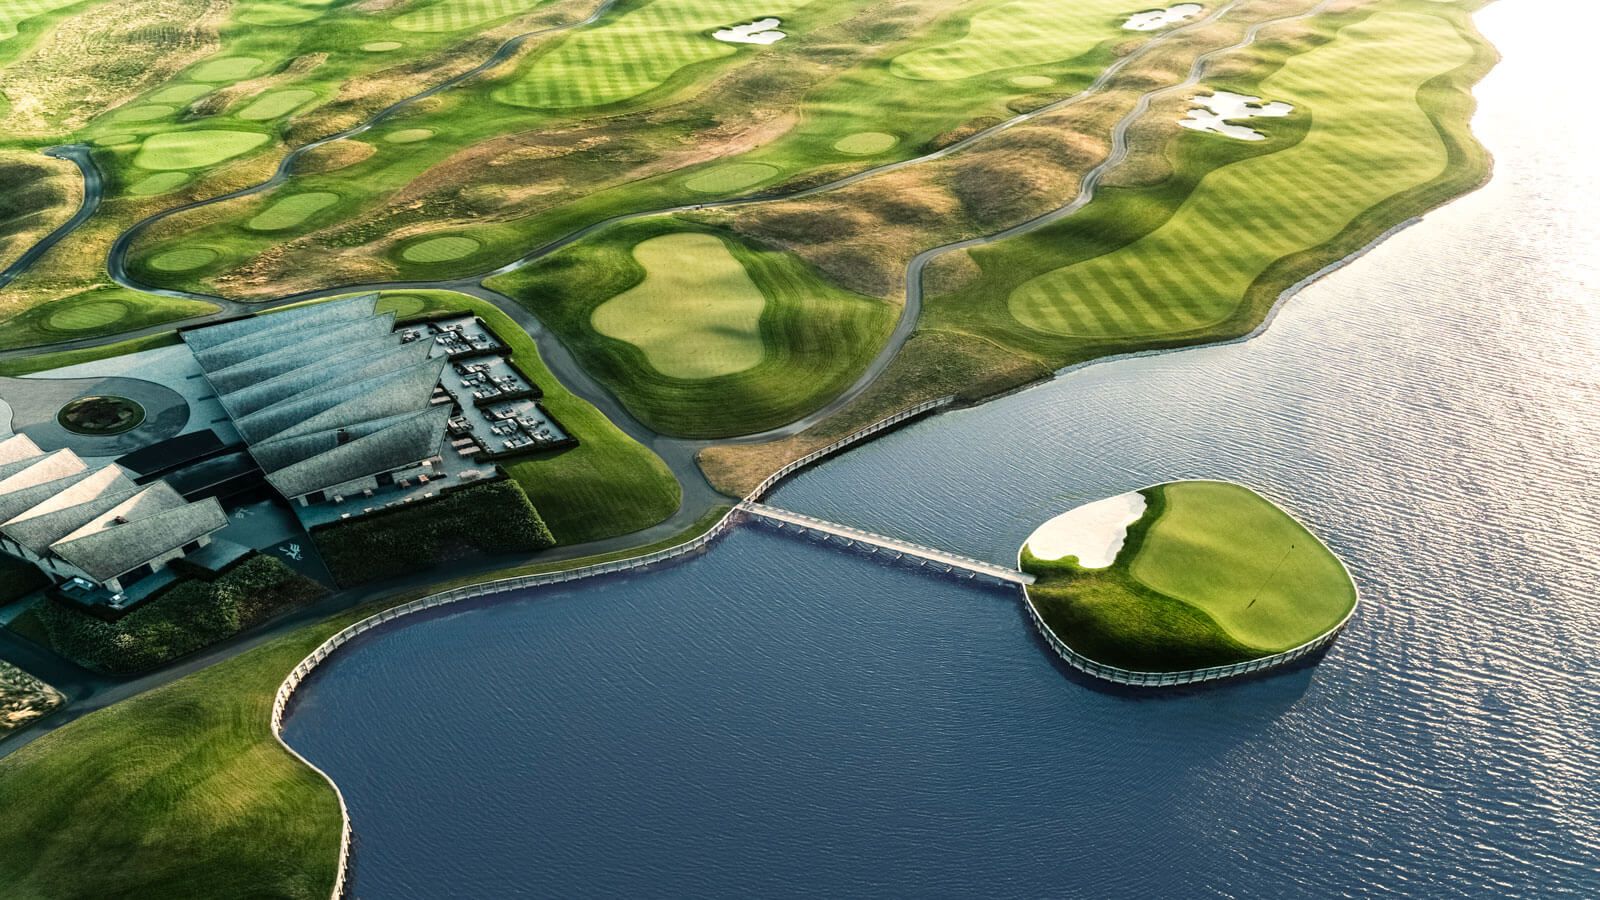 Jack Nicklaus golf course in Funen ranked 67th best in world